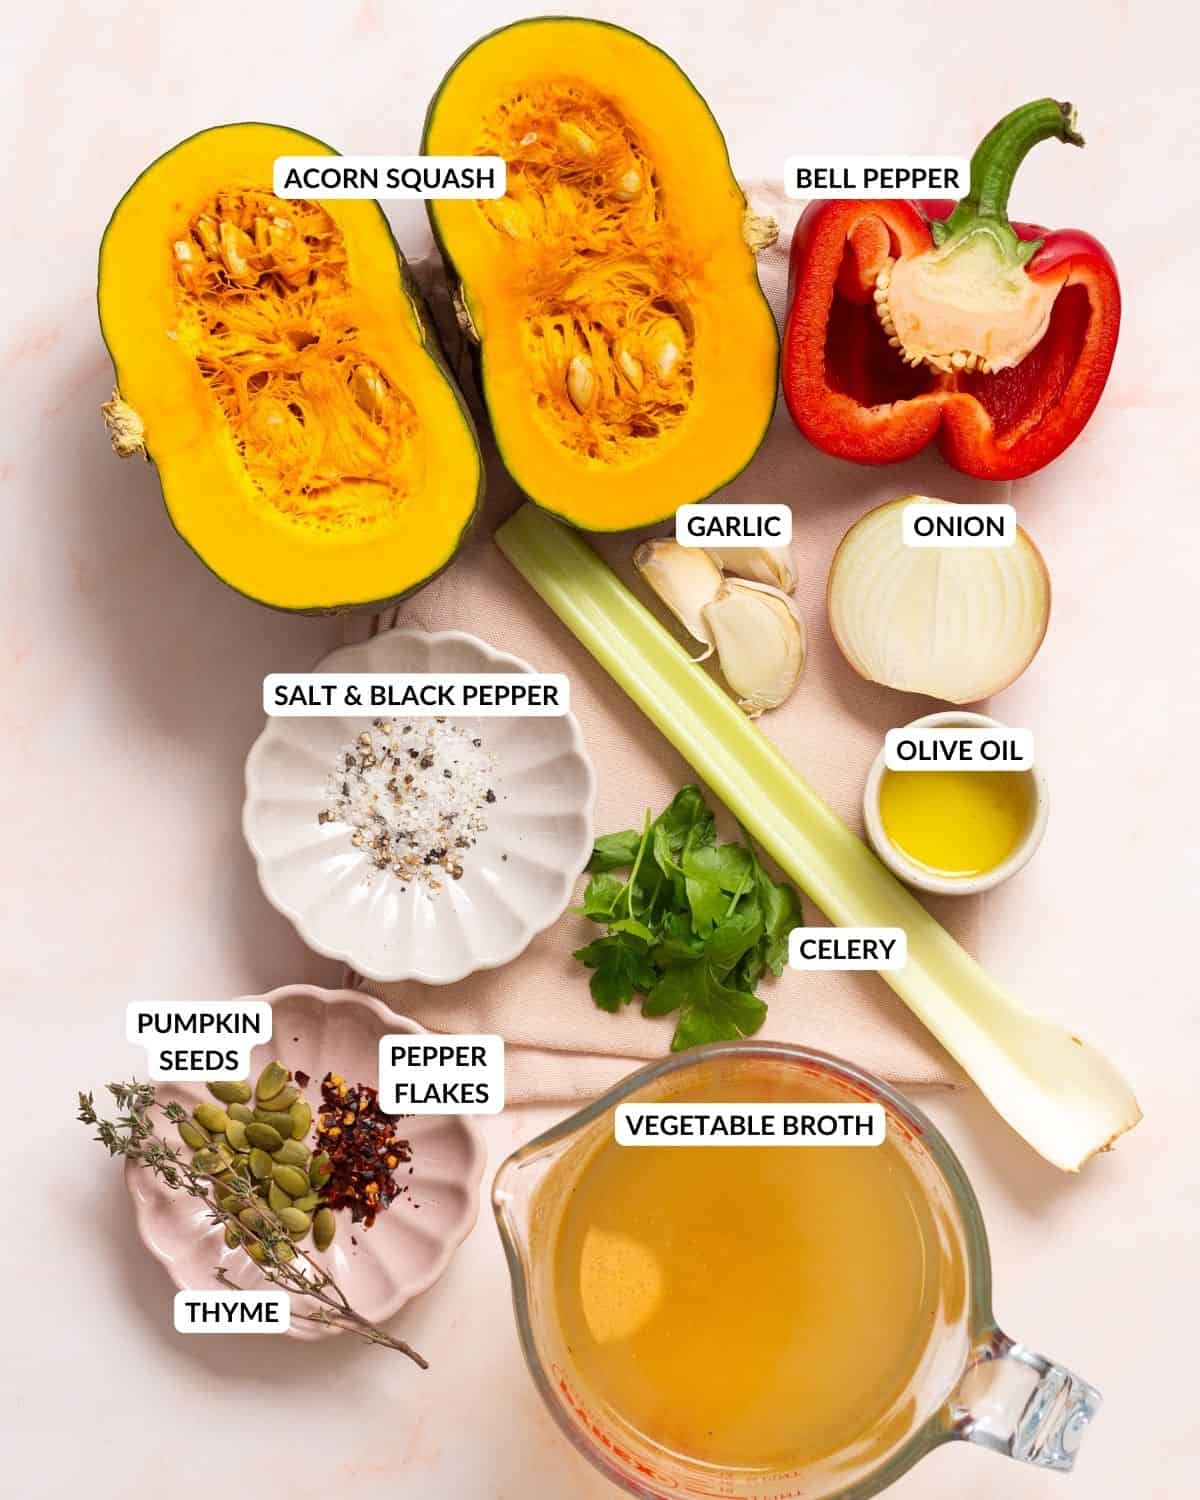 An image of the ingredients of acorn squash soup arranged side by side on a table with labels.